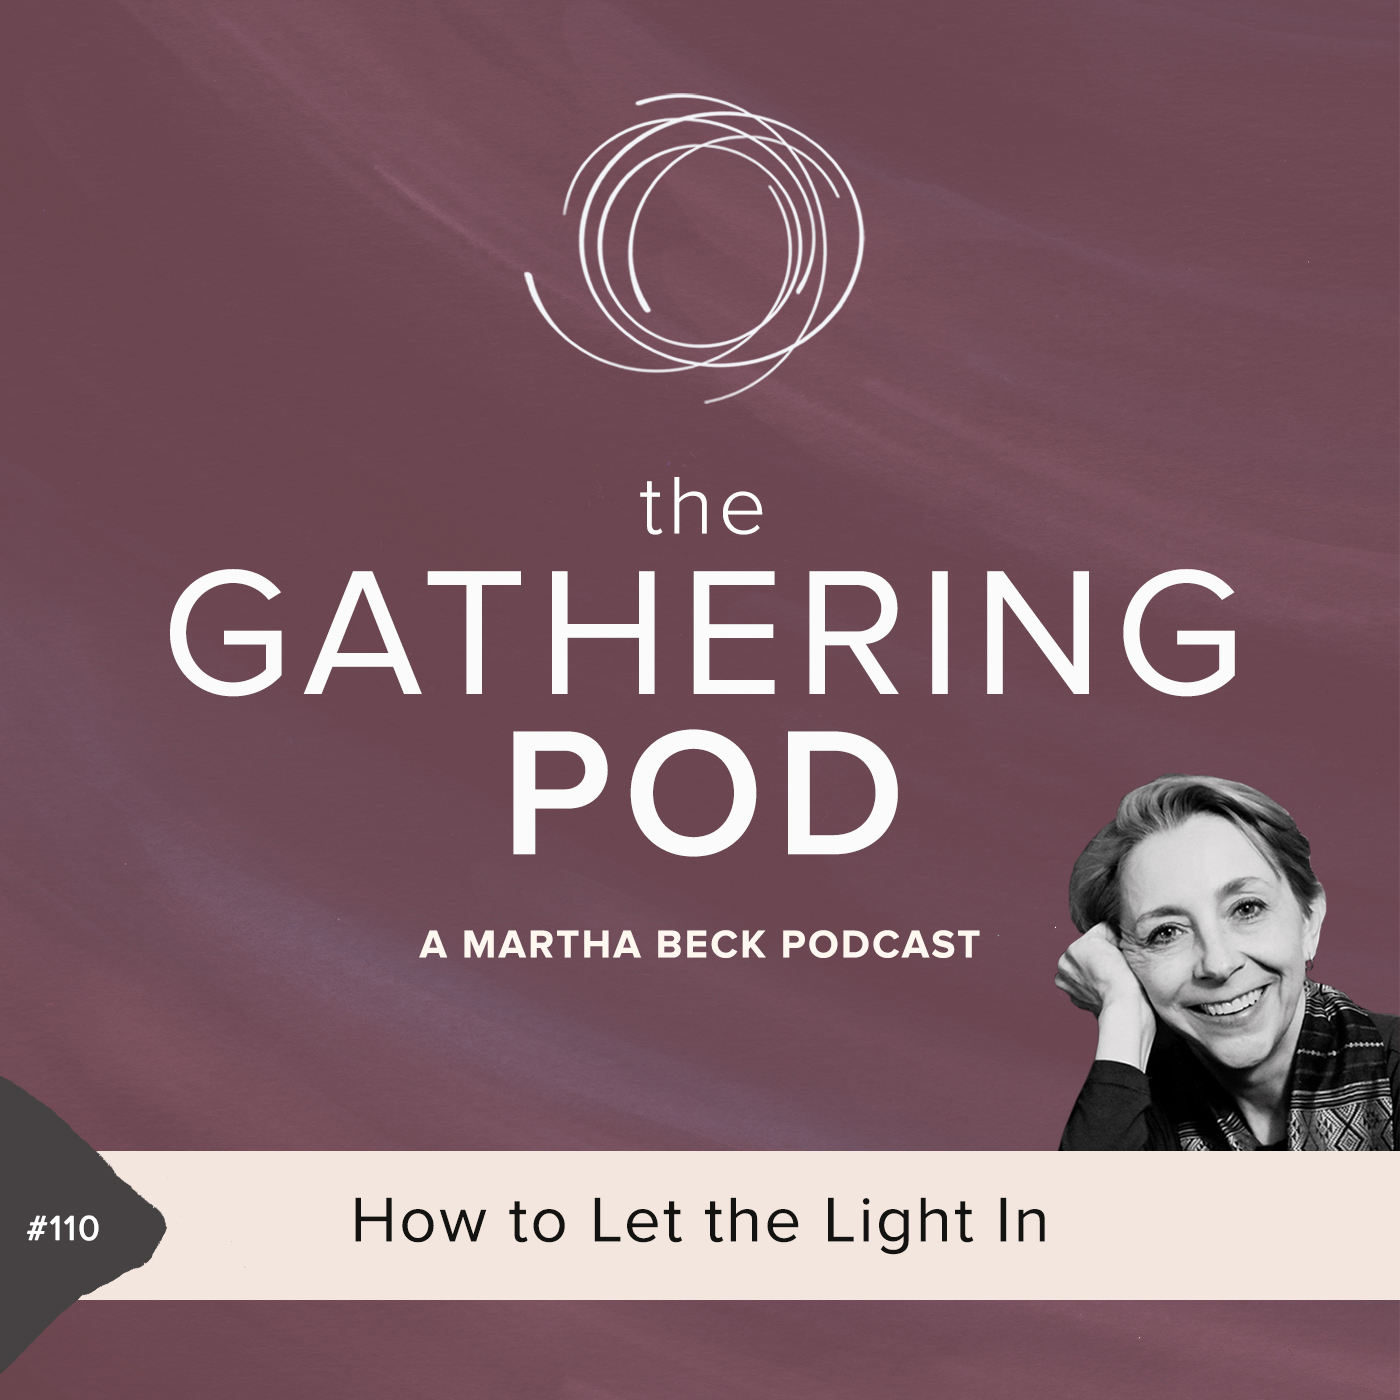 Image for The Gathering Pod A Martha Beck Podcast Episode #110 How to Let the Light In